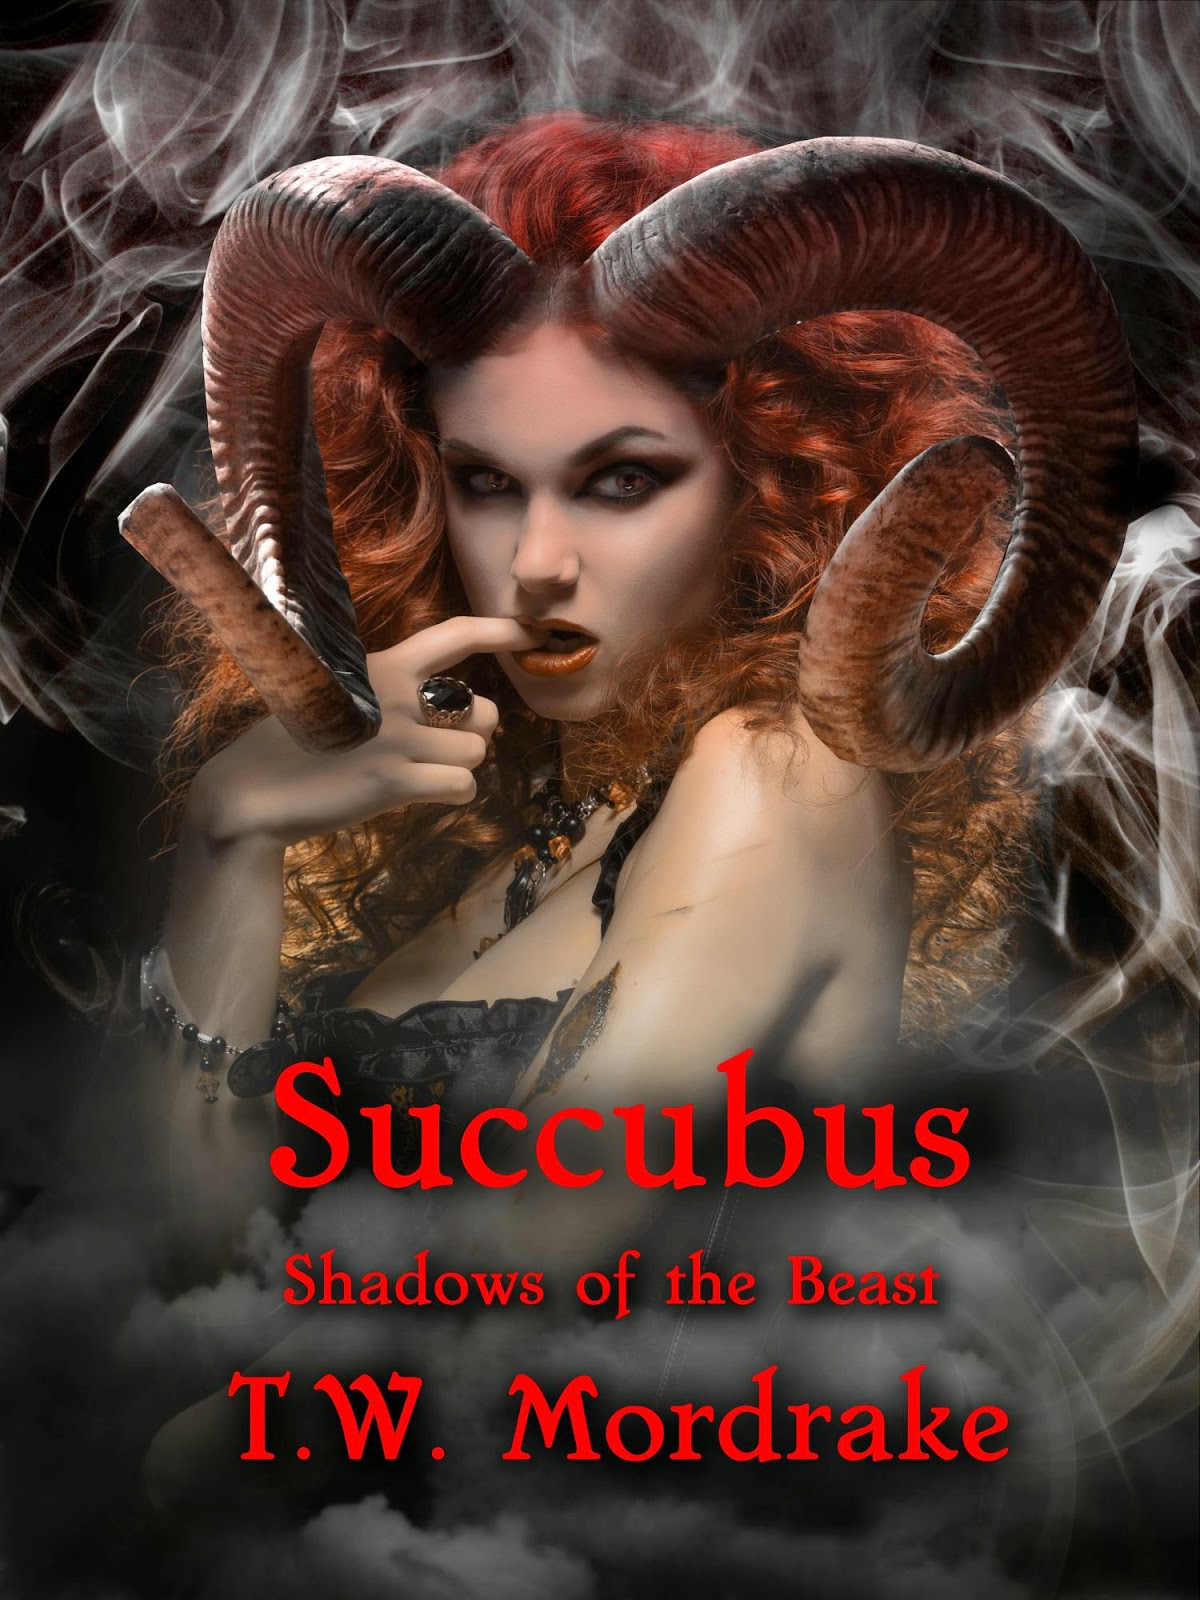 Giveaway- Succubus: Shadows of the Beast T.W. Mordrake.